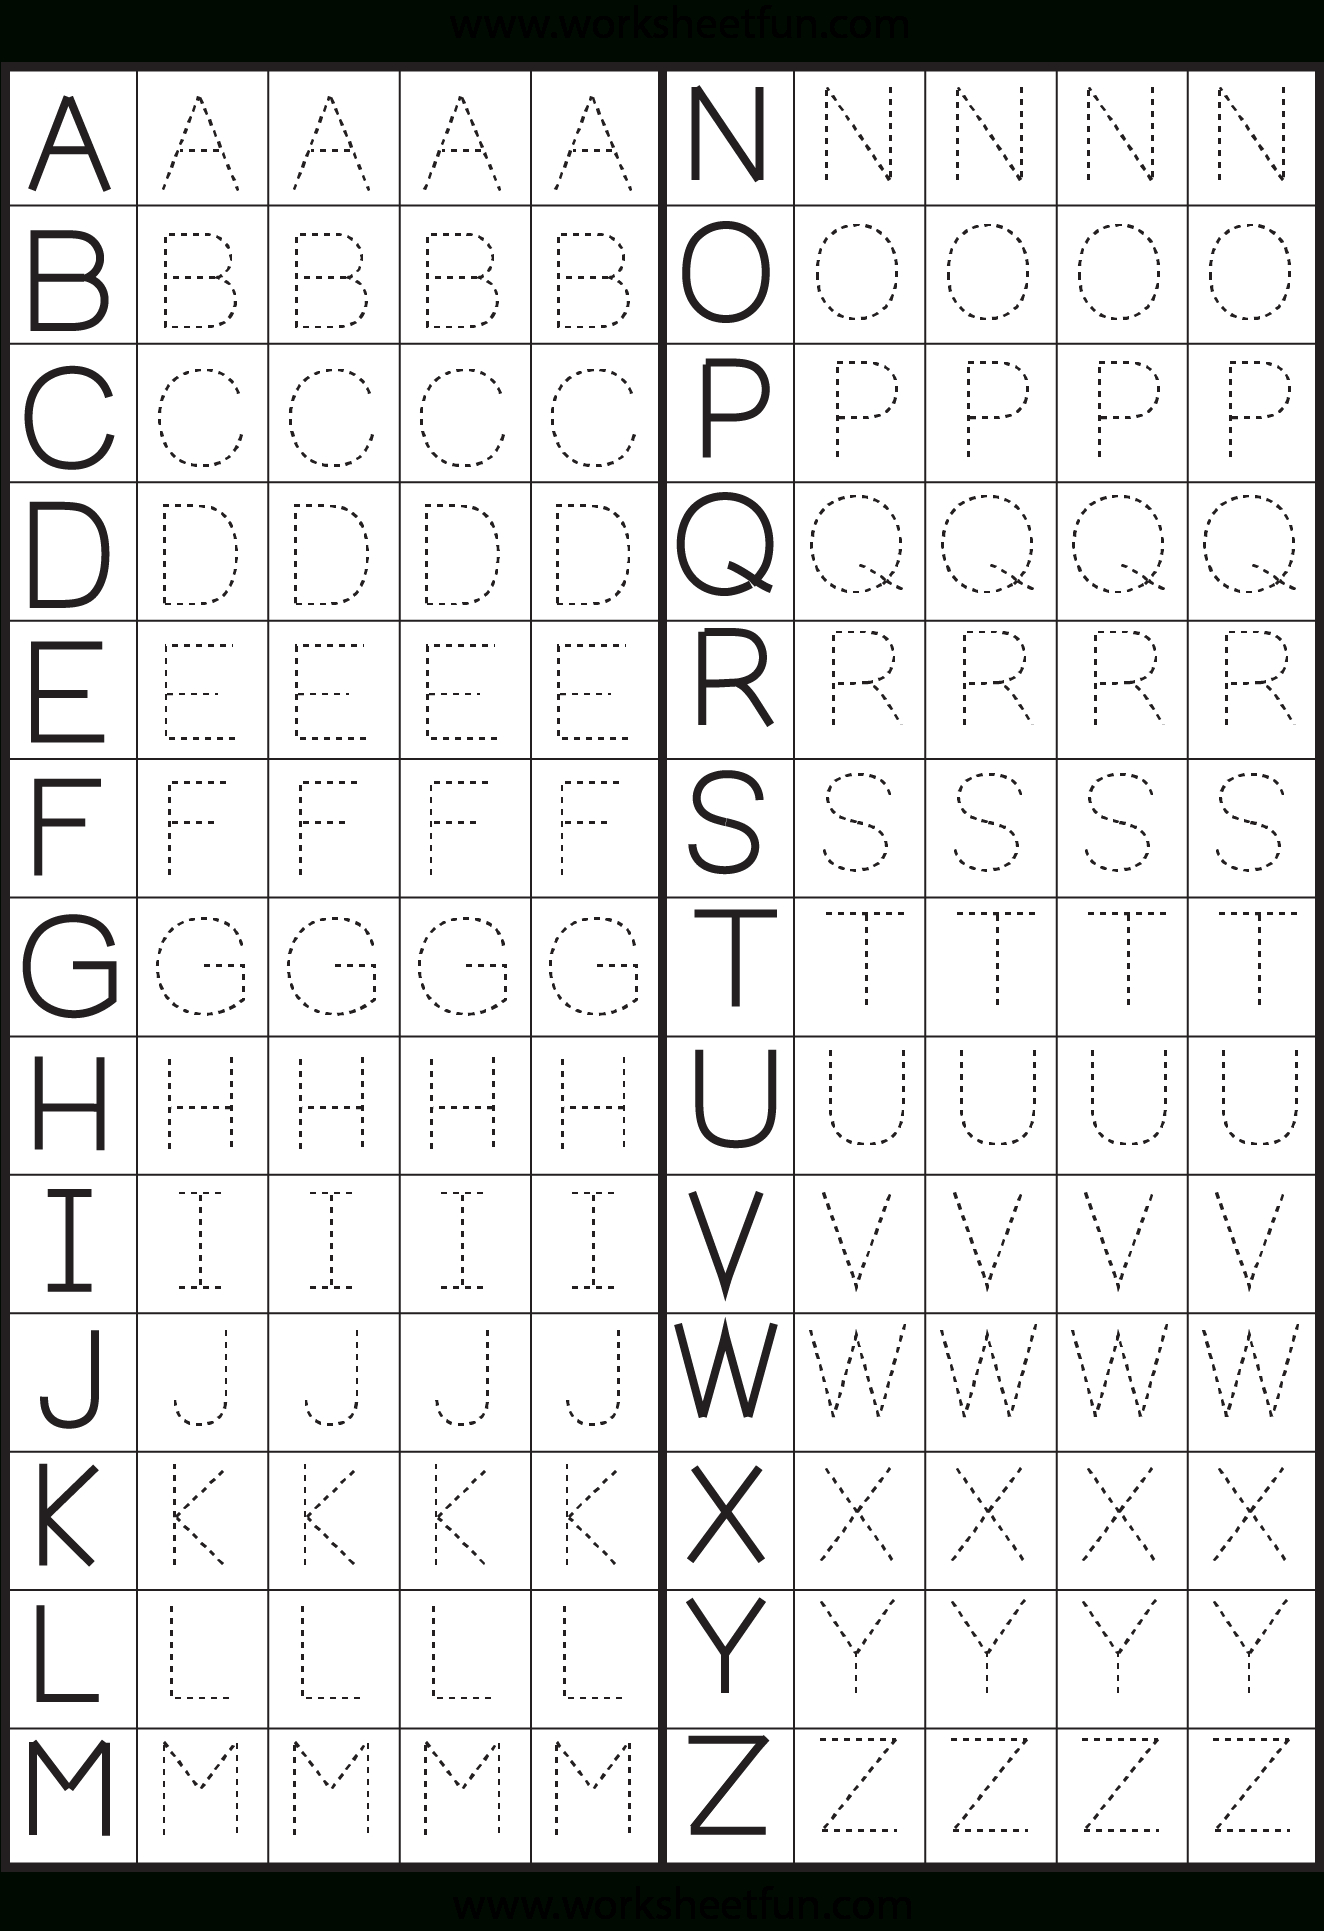 Printables Alphabet Pdf - Buscar Con Google | Letter Tracing throughout Letter Tracing Worksheets A-Z Pdf